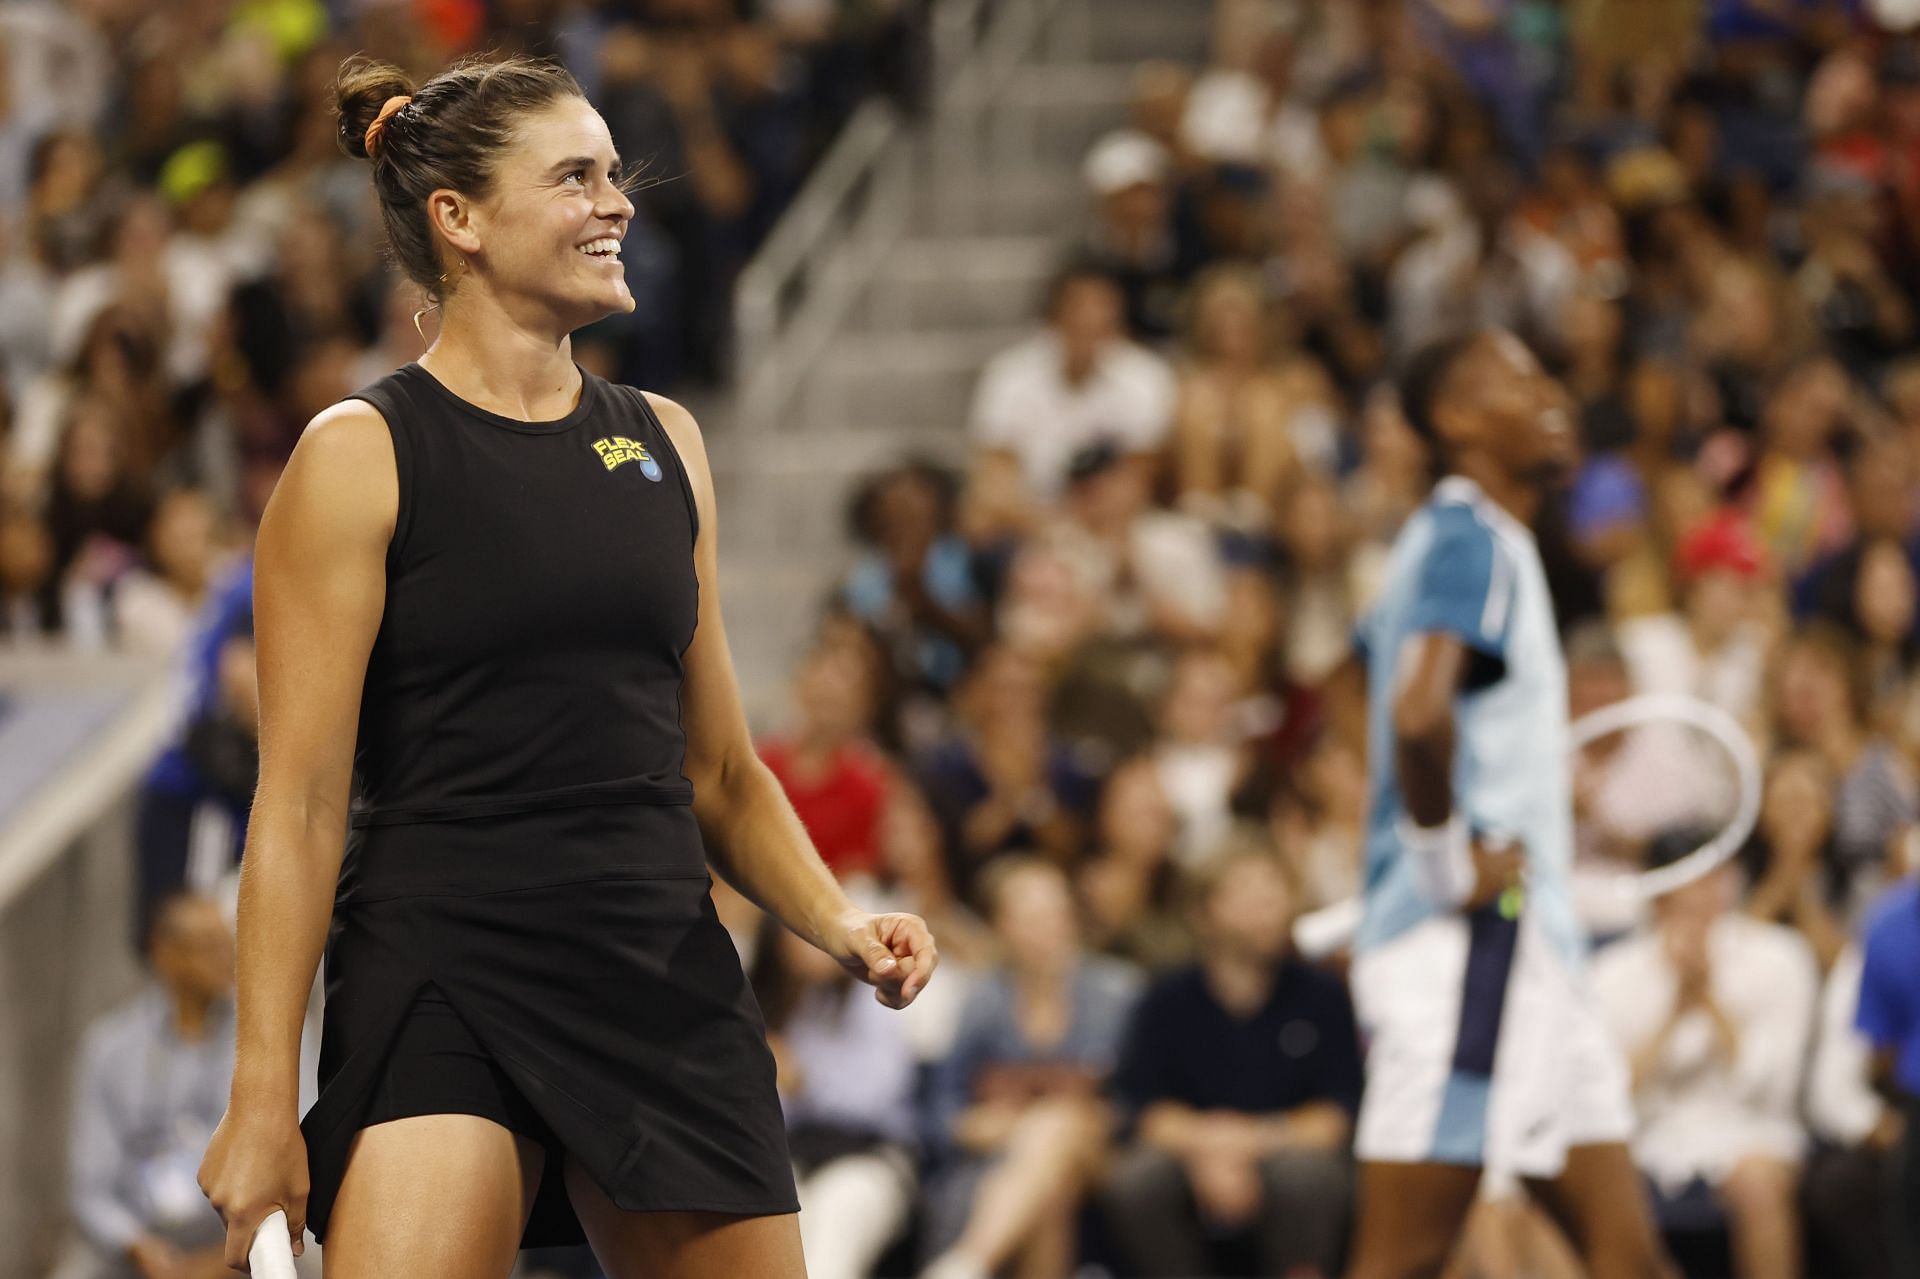 Jennifer Brady at 2023 US Open - Stars of the Open Exhibition Match to Benefit Ukraine Relief